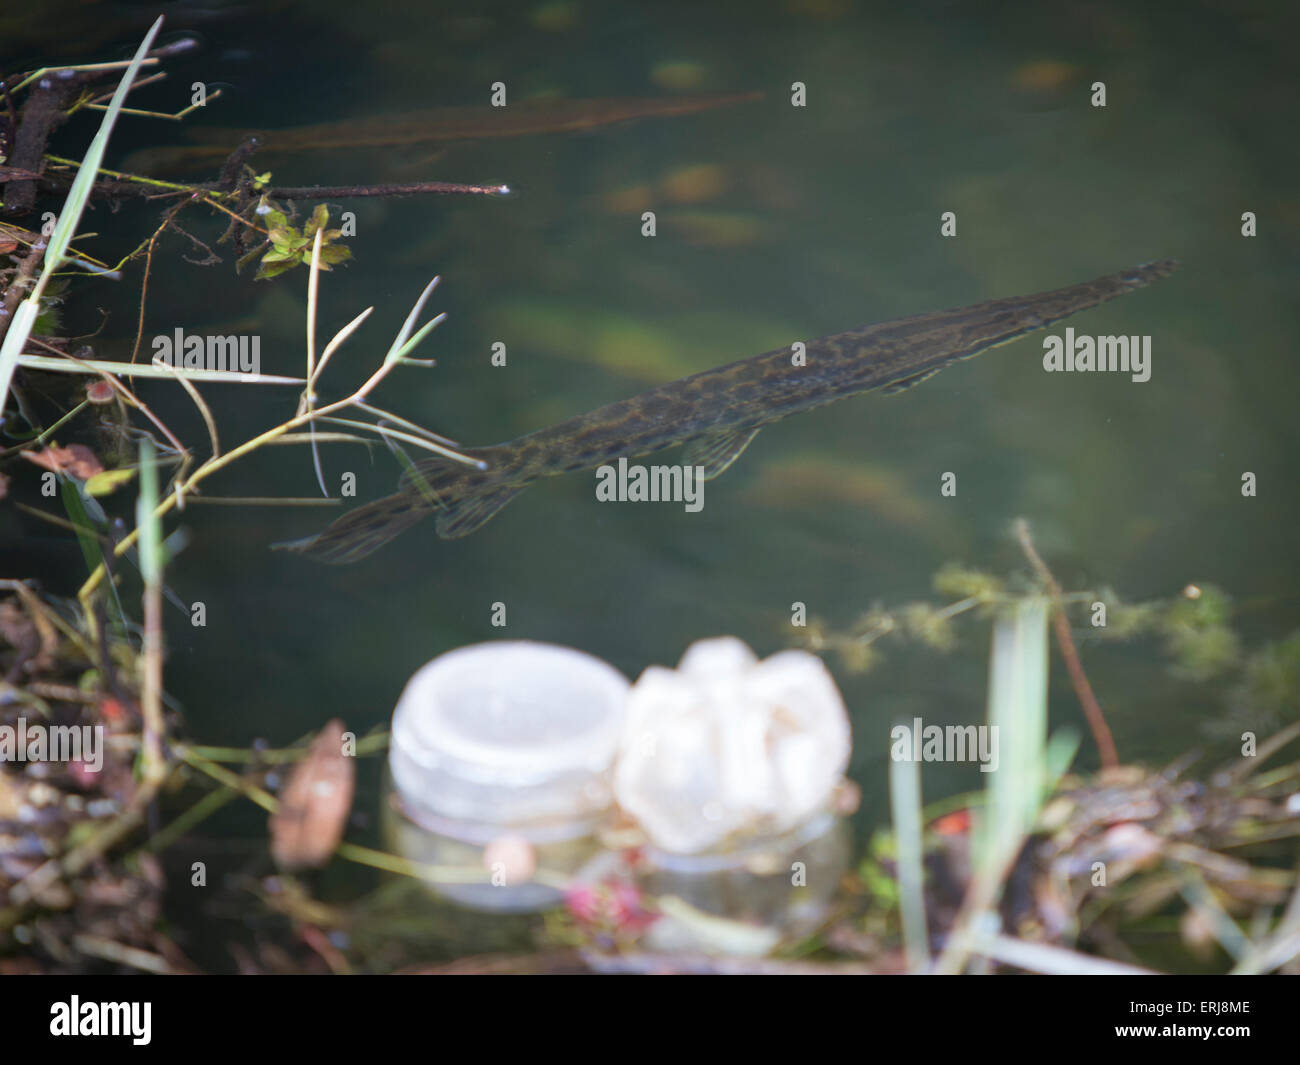 Needle nose gar swimming in polluted water Stock Photo